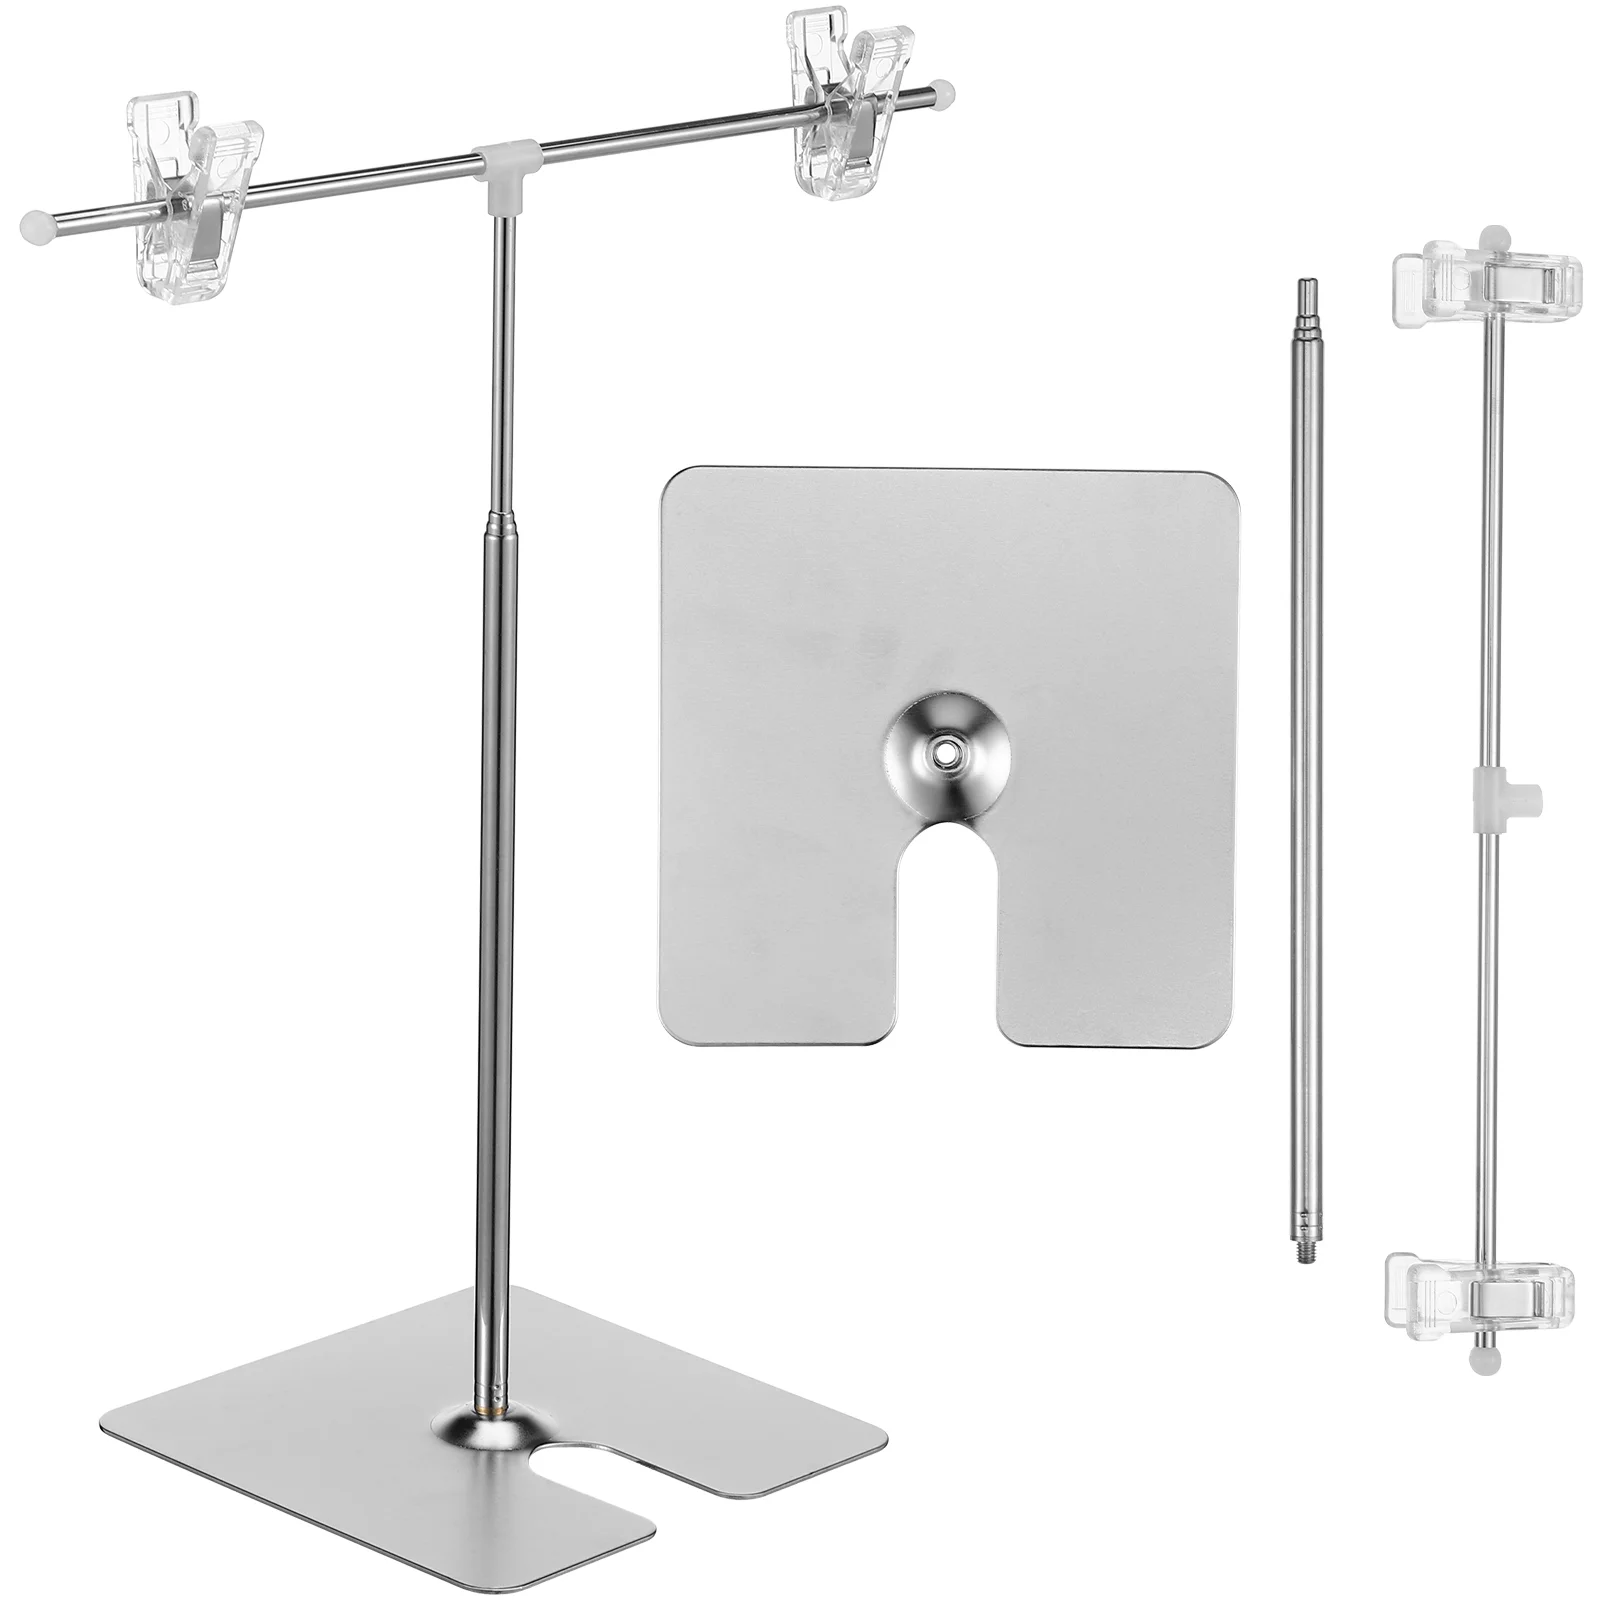 Floor Standing Sign Holder Stainless Steel Poster Display Shelf Table Top Easel a4 metal promotional price tags poster sign holder frame 8 5 x 11 inches shelf pop clip ads display stand for clothing stores